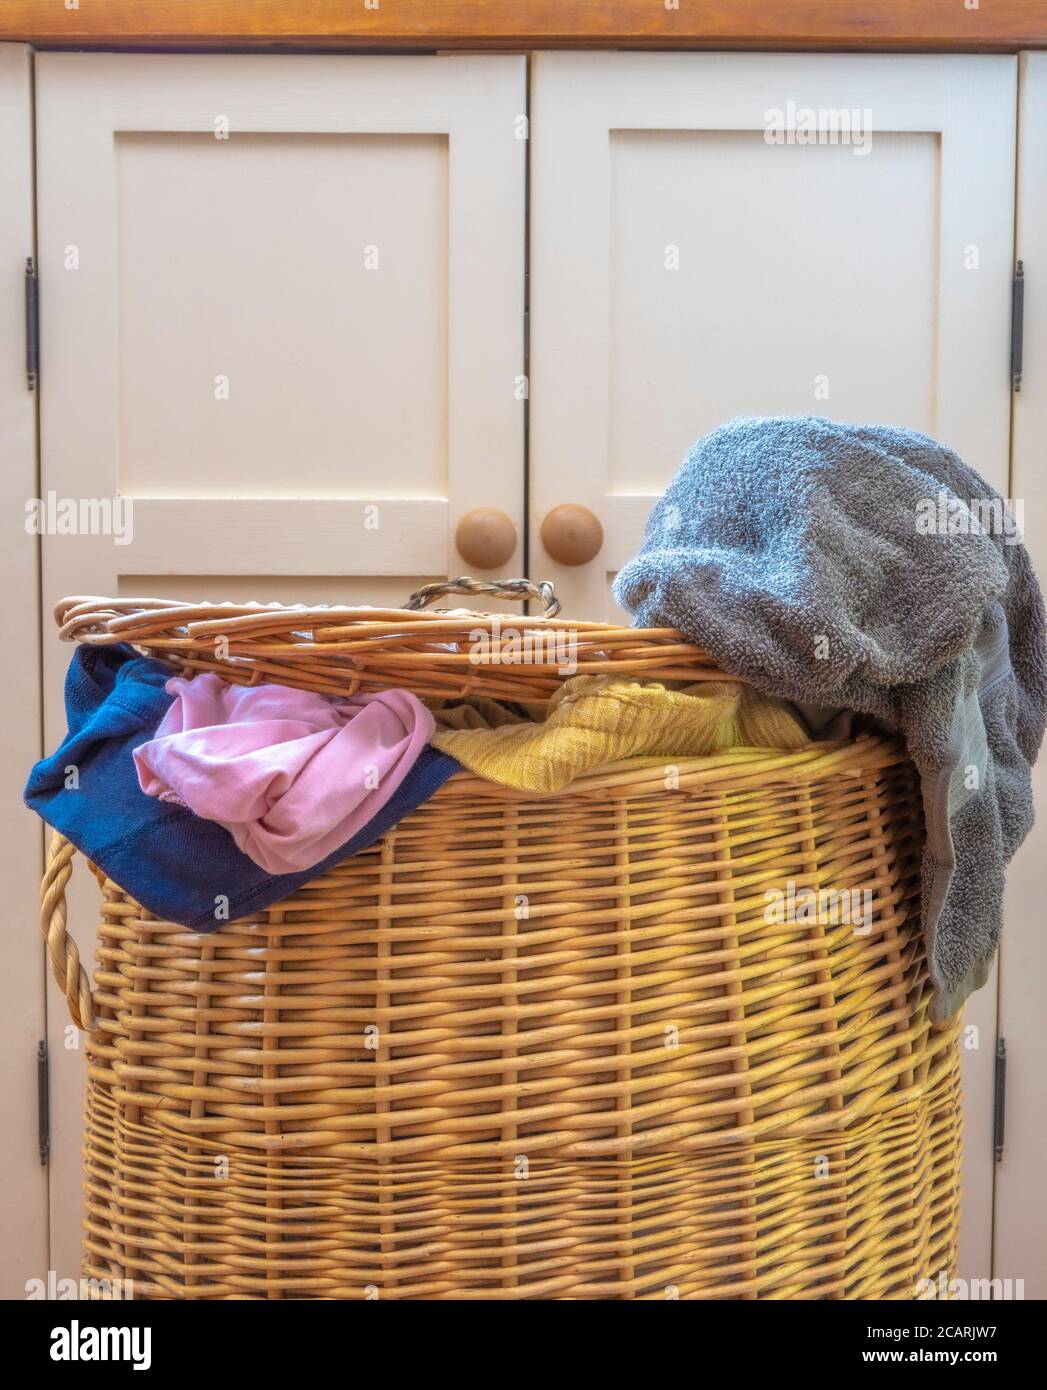 https://c8.alamy.com/comp/2CARJW7/a-full-and-overflowing-washing-laundry-wicker-basket-on-the-floor-in-front-of-a-kitchen-floor-cupboard-2CARJW7.jpg